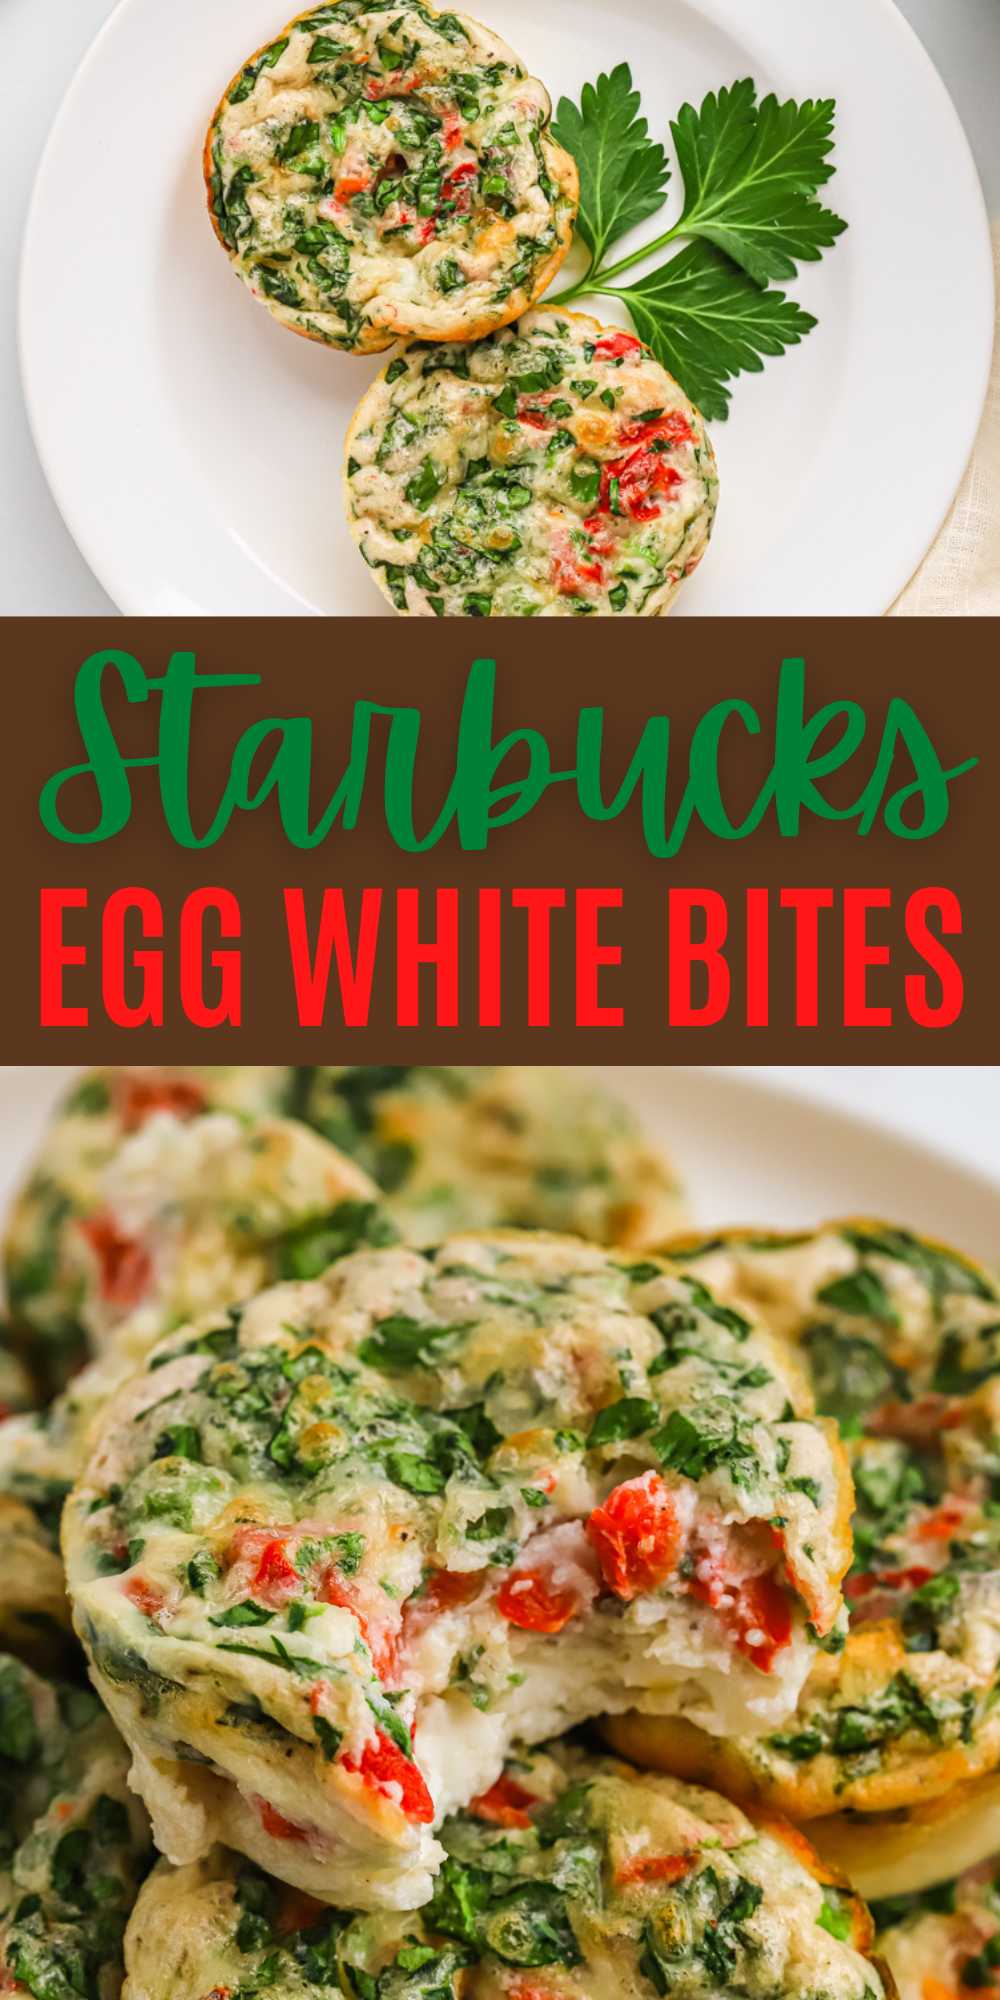 Starbucks Egg White Bites are simple and the perfect size for breakfast on the go. Easy to make with simple ingredient for a quick breakfast. Spinach and red peppers egg bites are easily made in your oven a delicious meal. #eatingonadime #starbuckscopycatrecipes #eggwhitebites